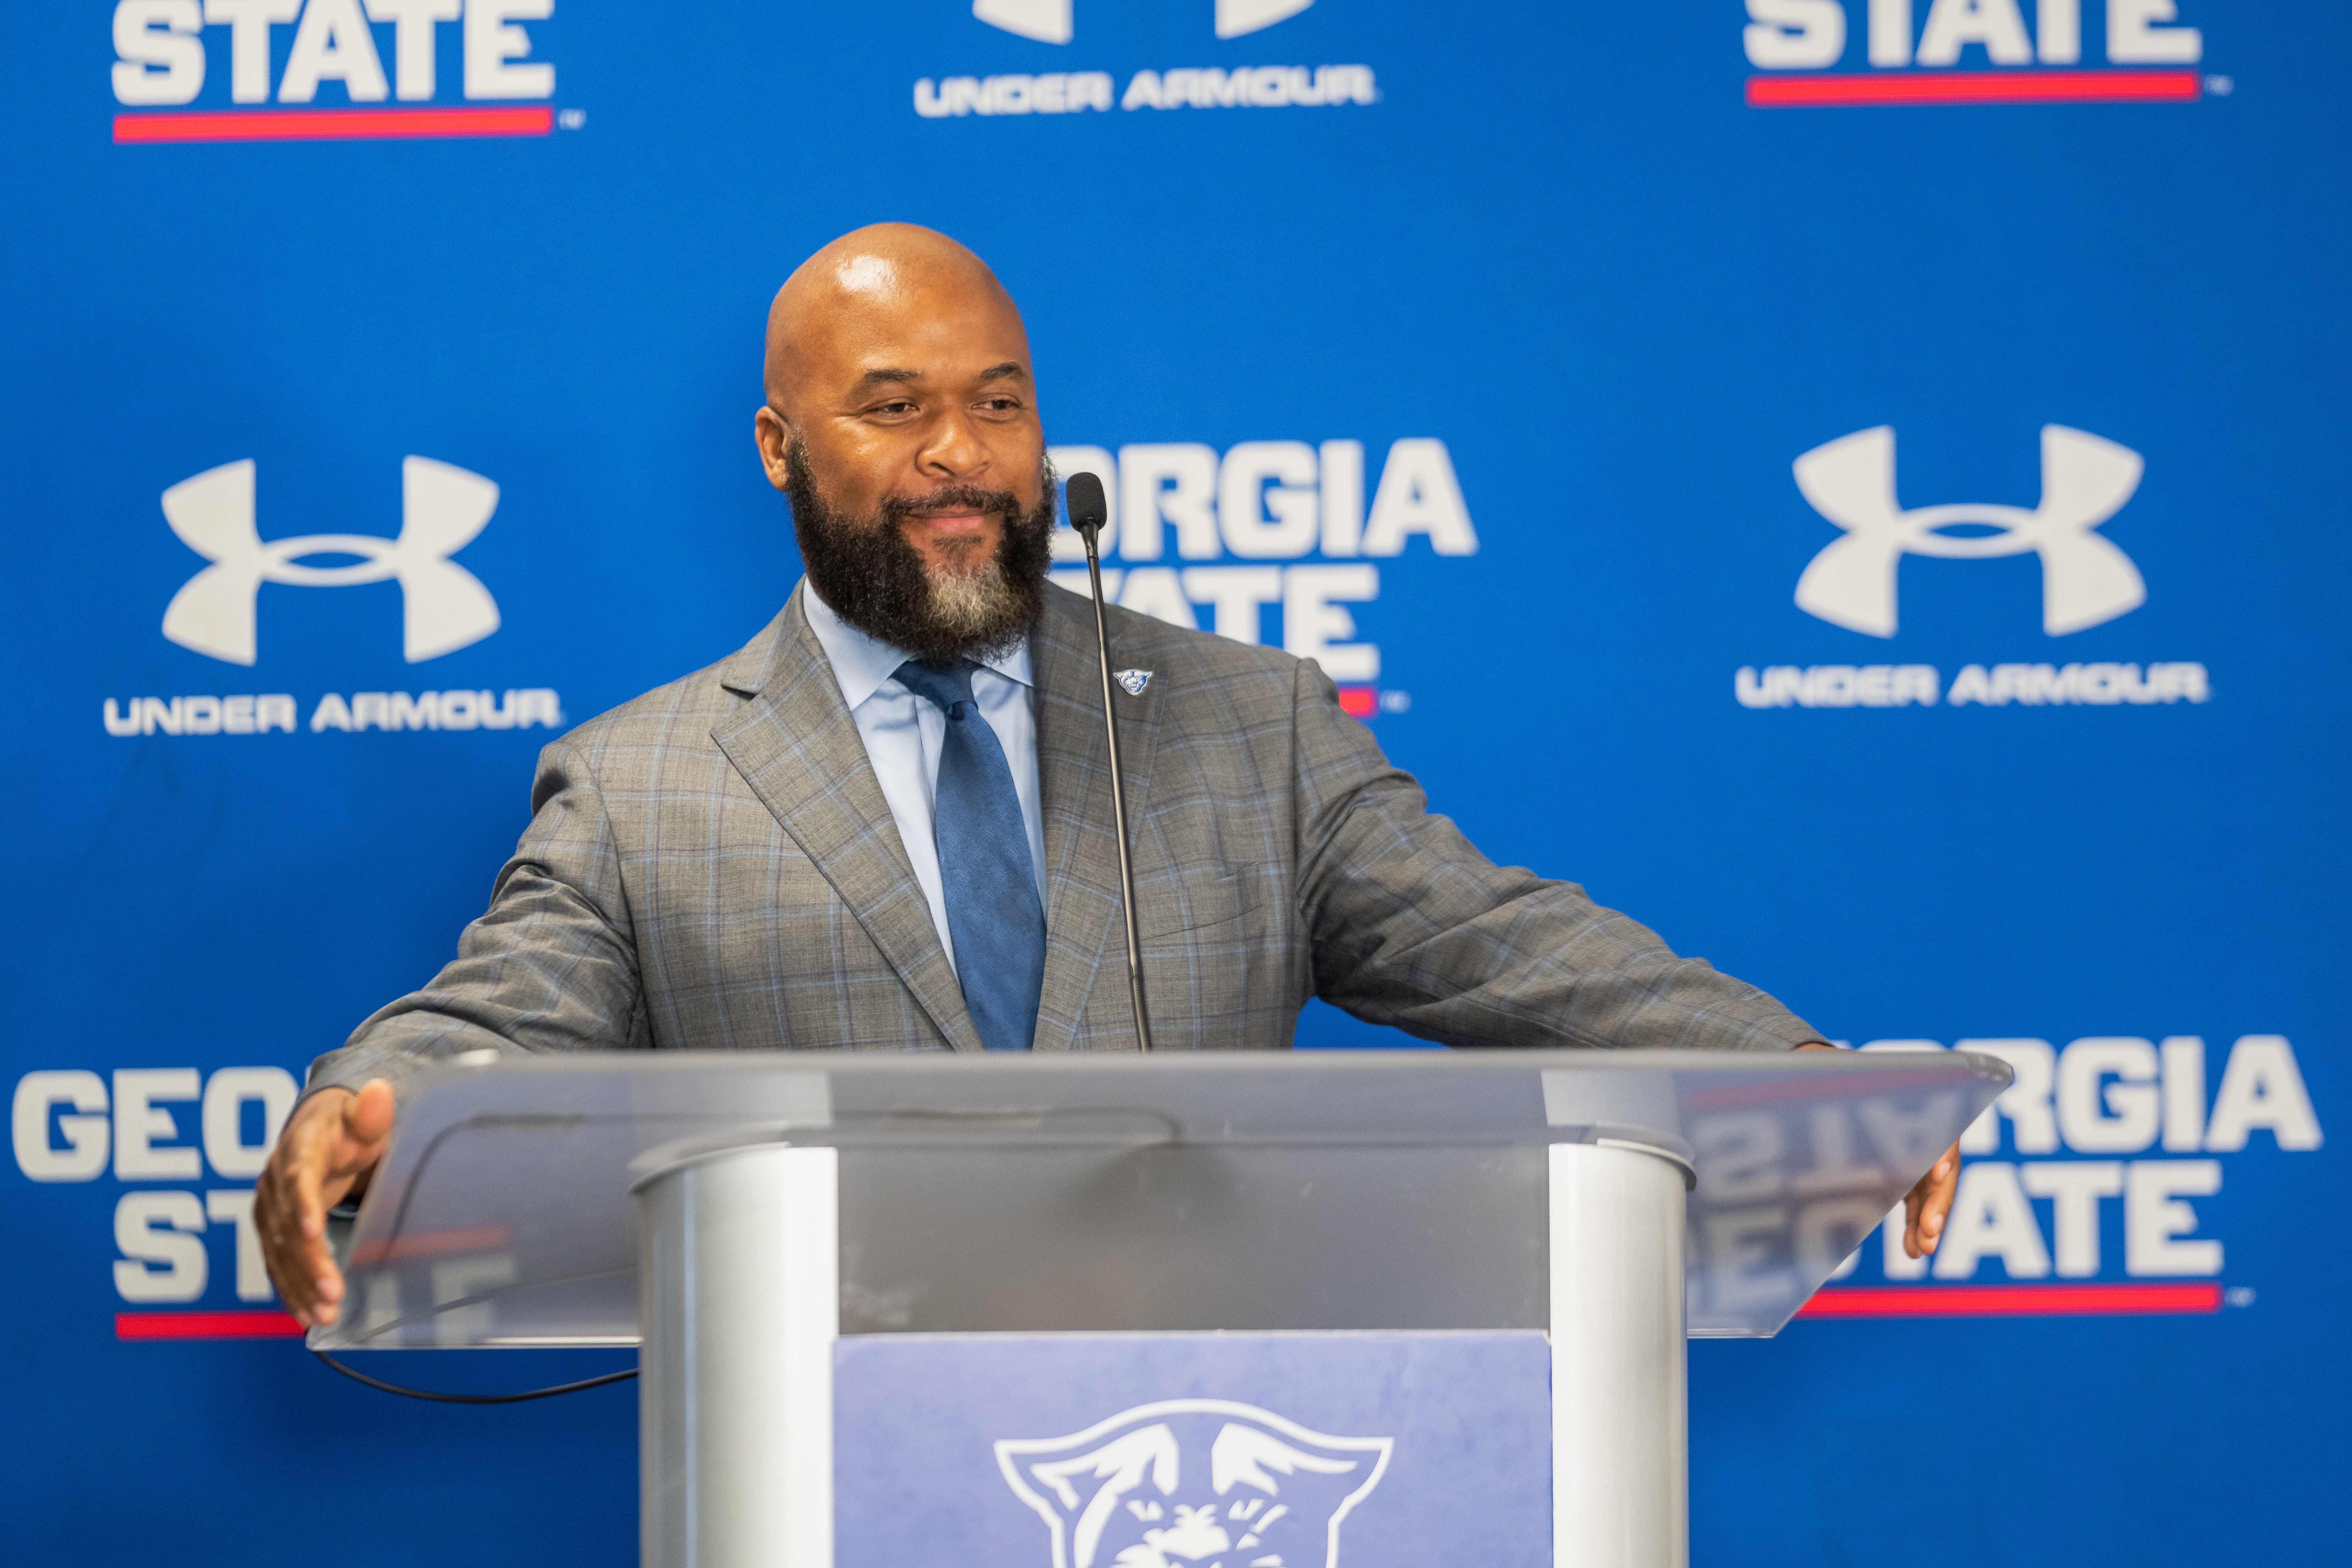 Georgia State Signs with Under Armour on Apparel Deal - Georgia